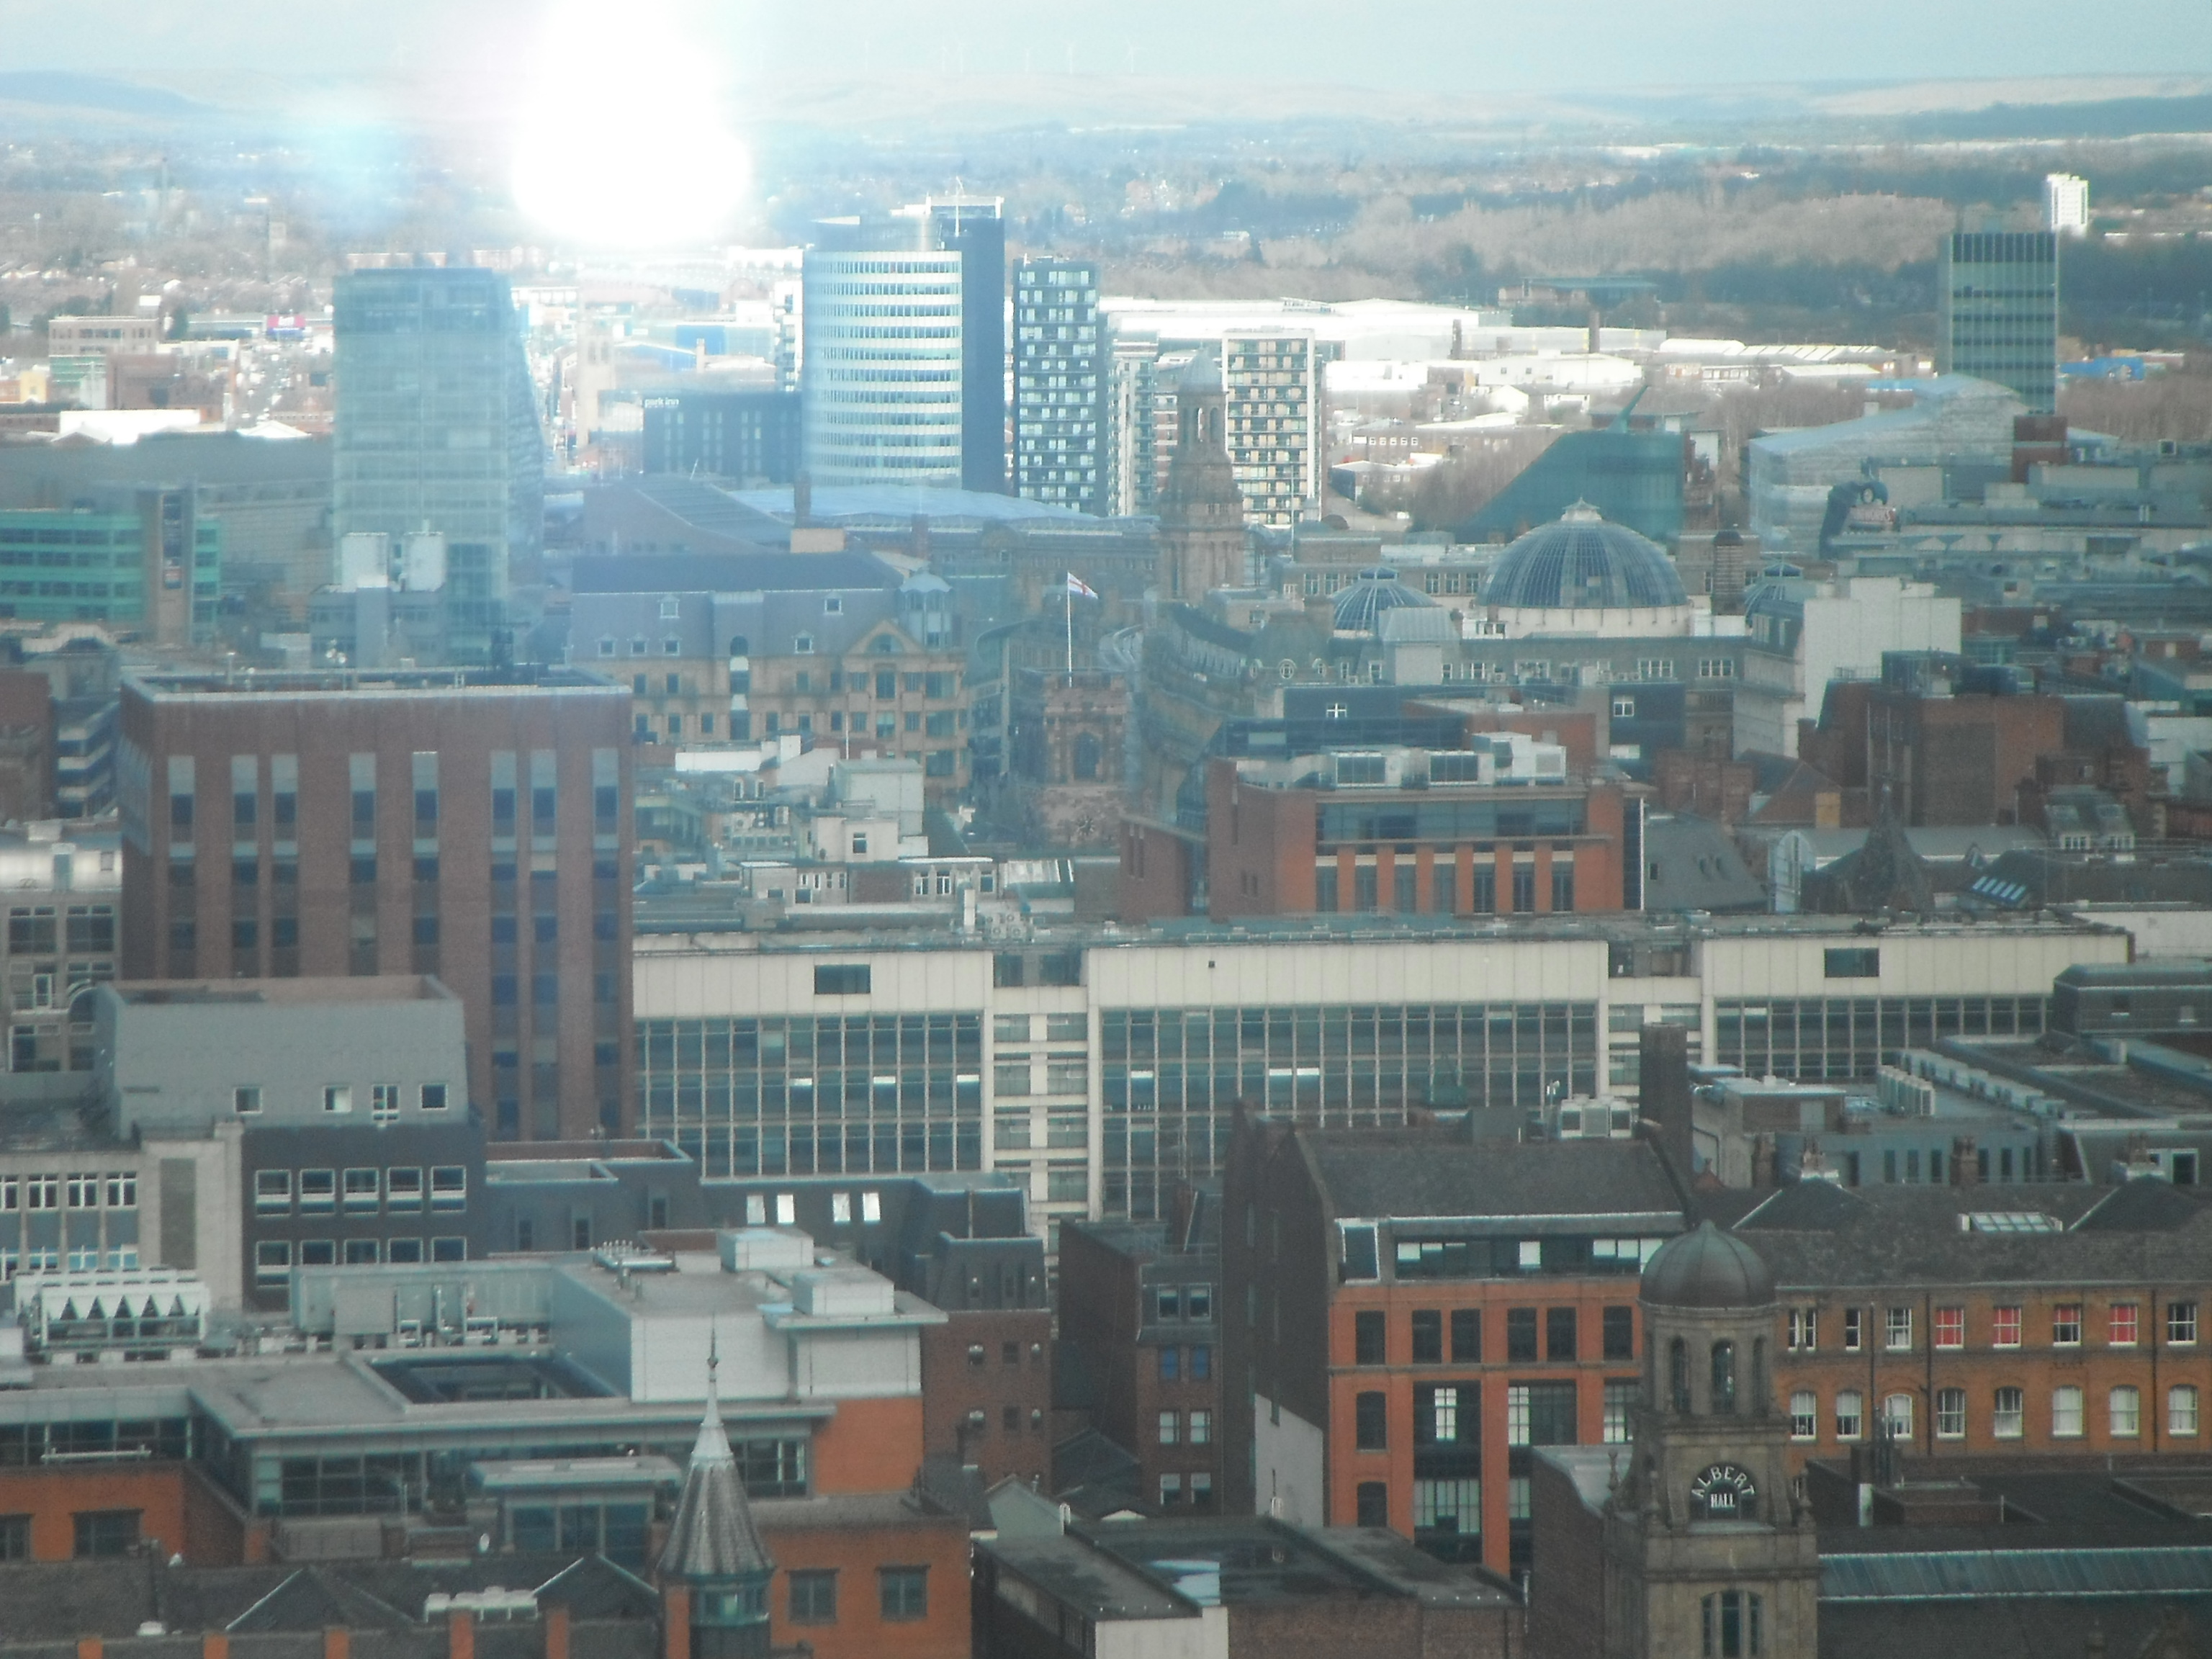 Photo taken by me – Manchester seen from the 22nd floor of The Beetham Hotel